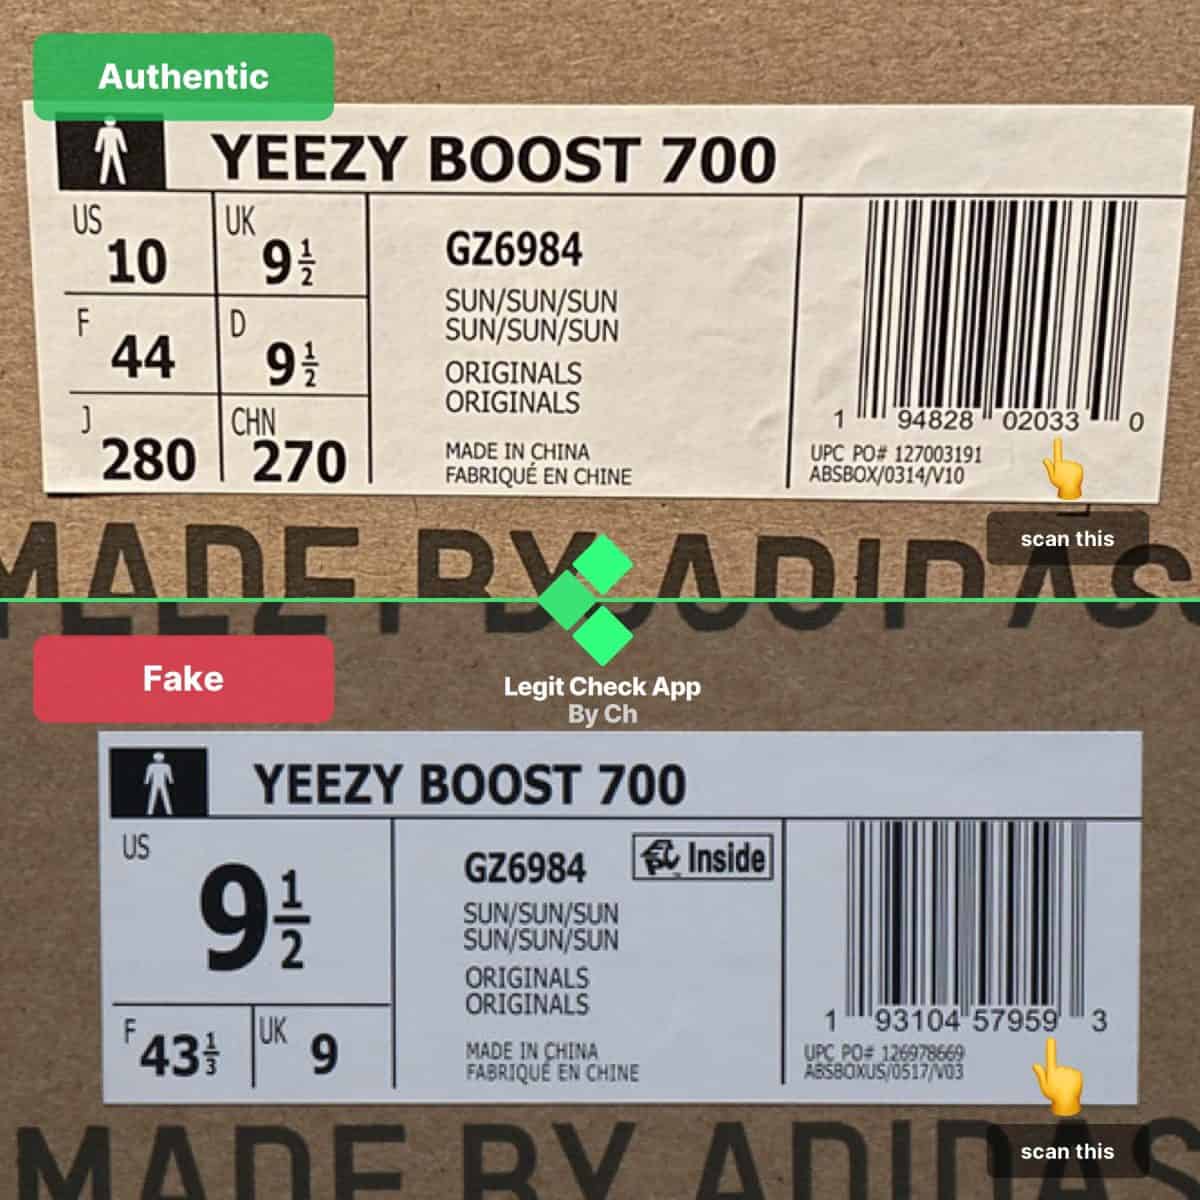 yeezy 700 sun authentic vs fake guide